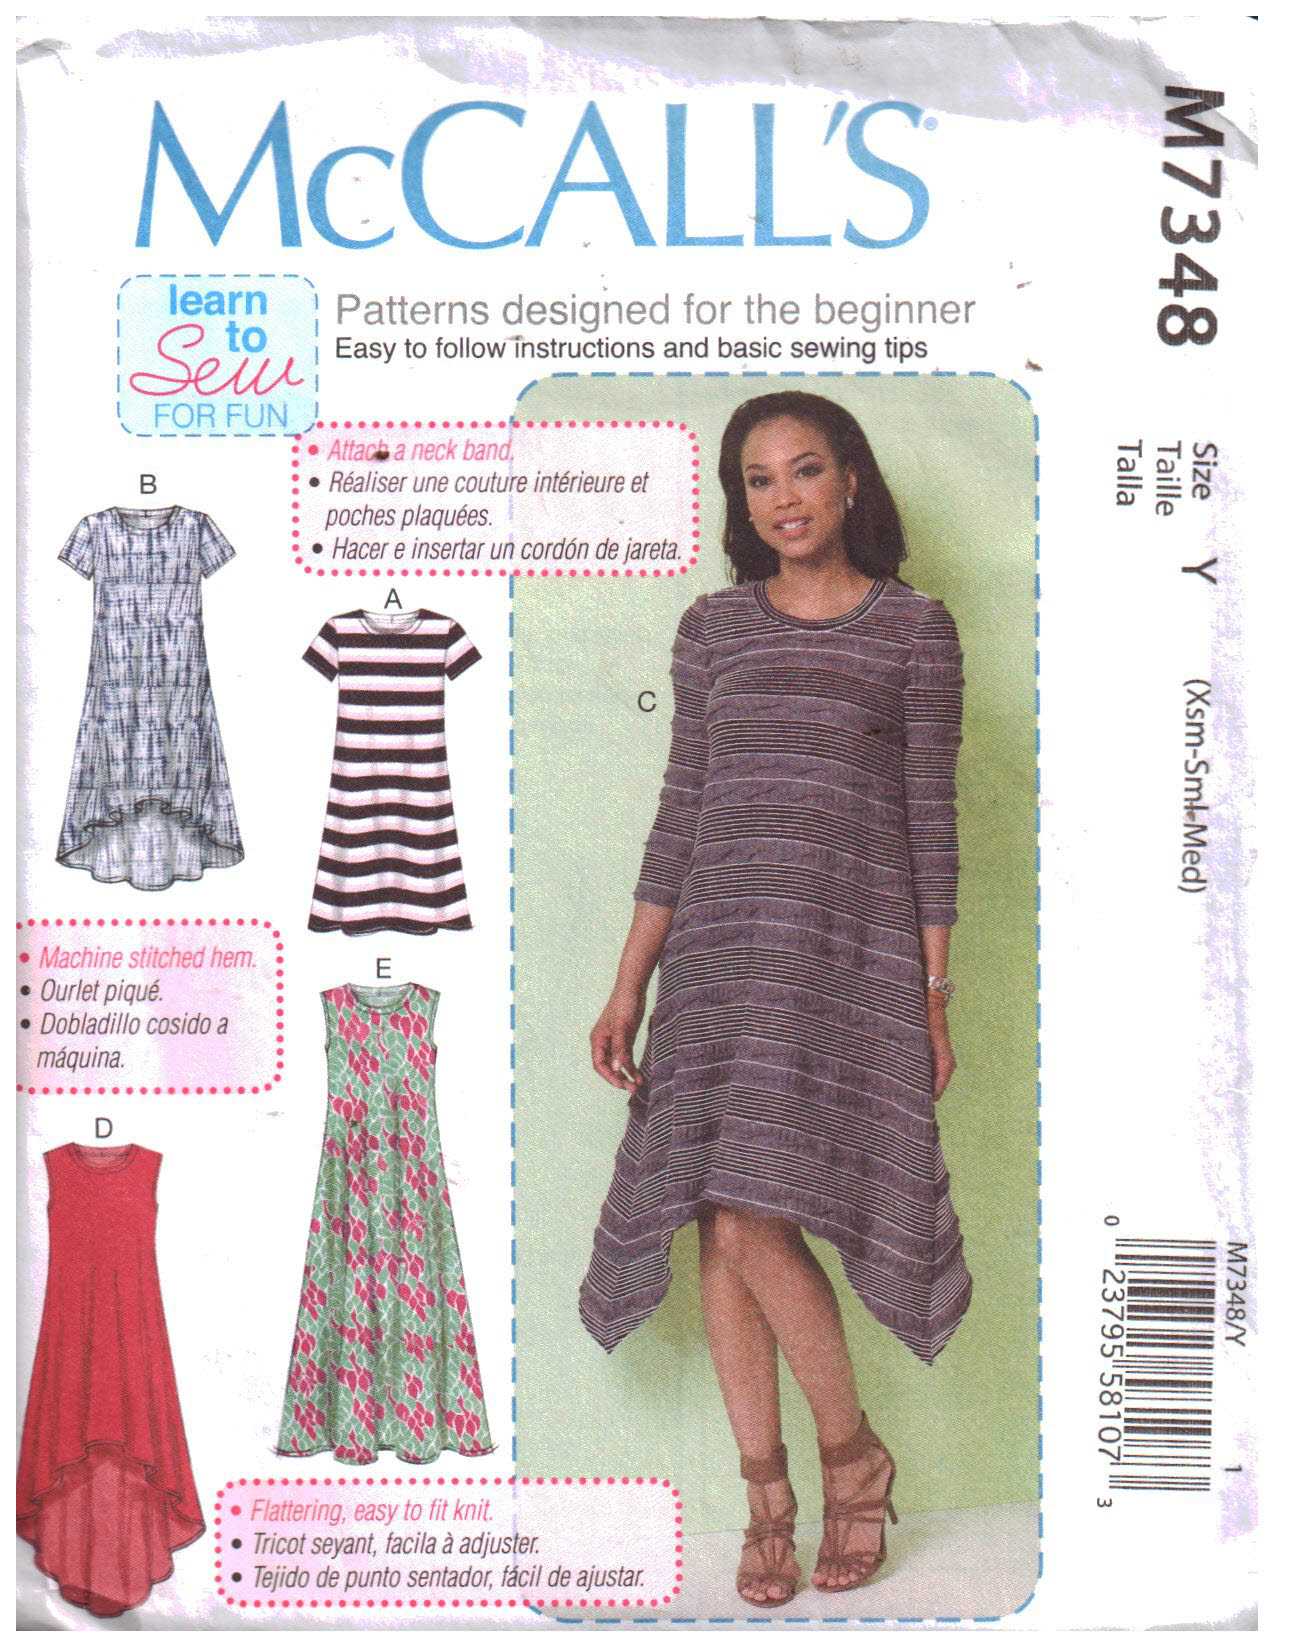 McCalls Sewing Patterns NEW/Used/Vintage Clothing Crafts and More